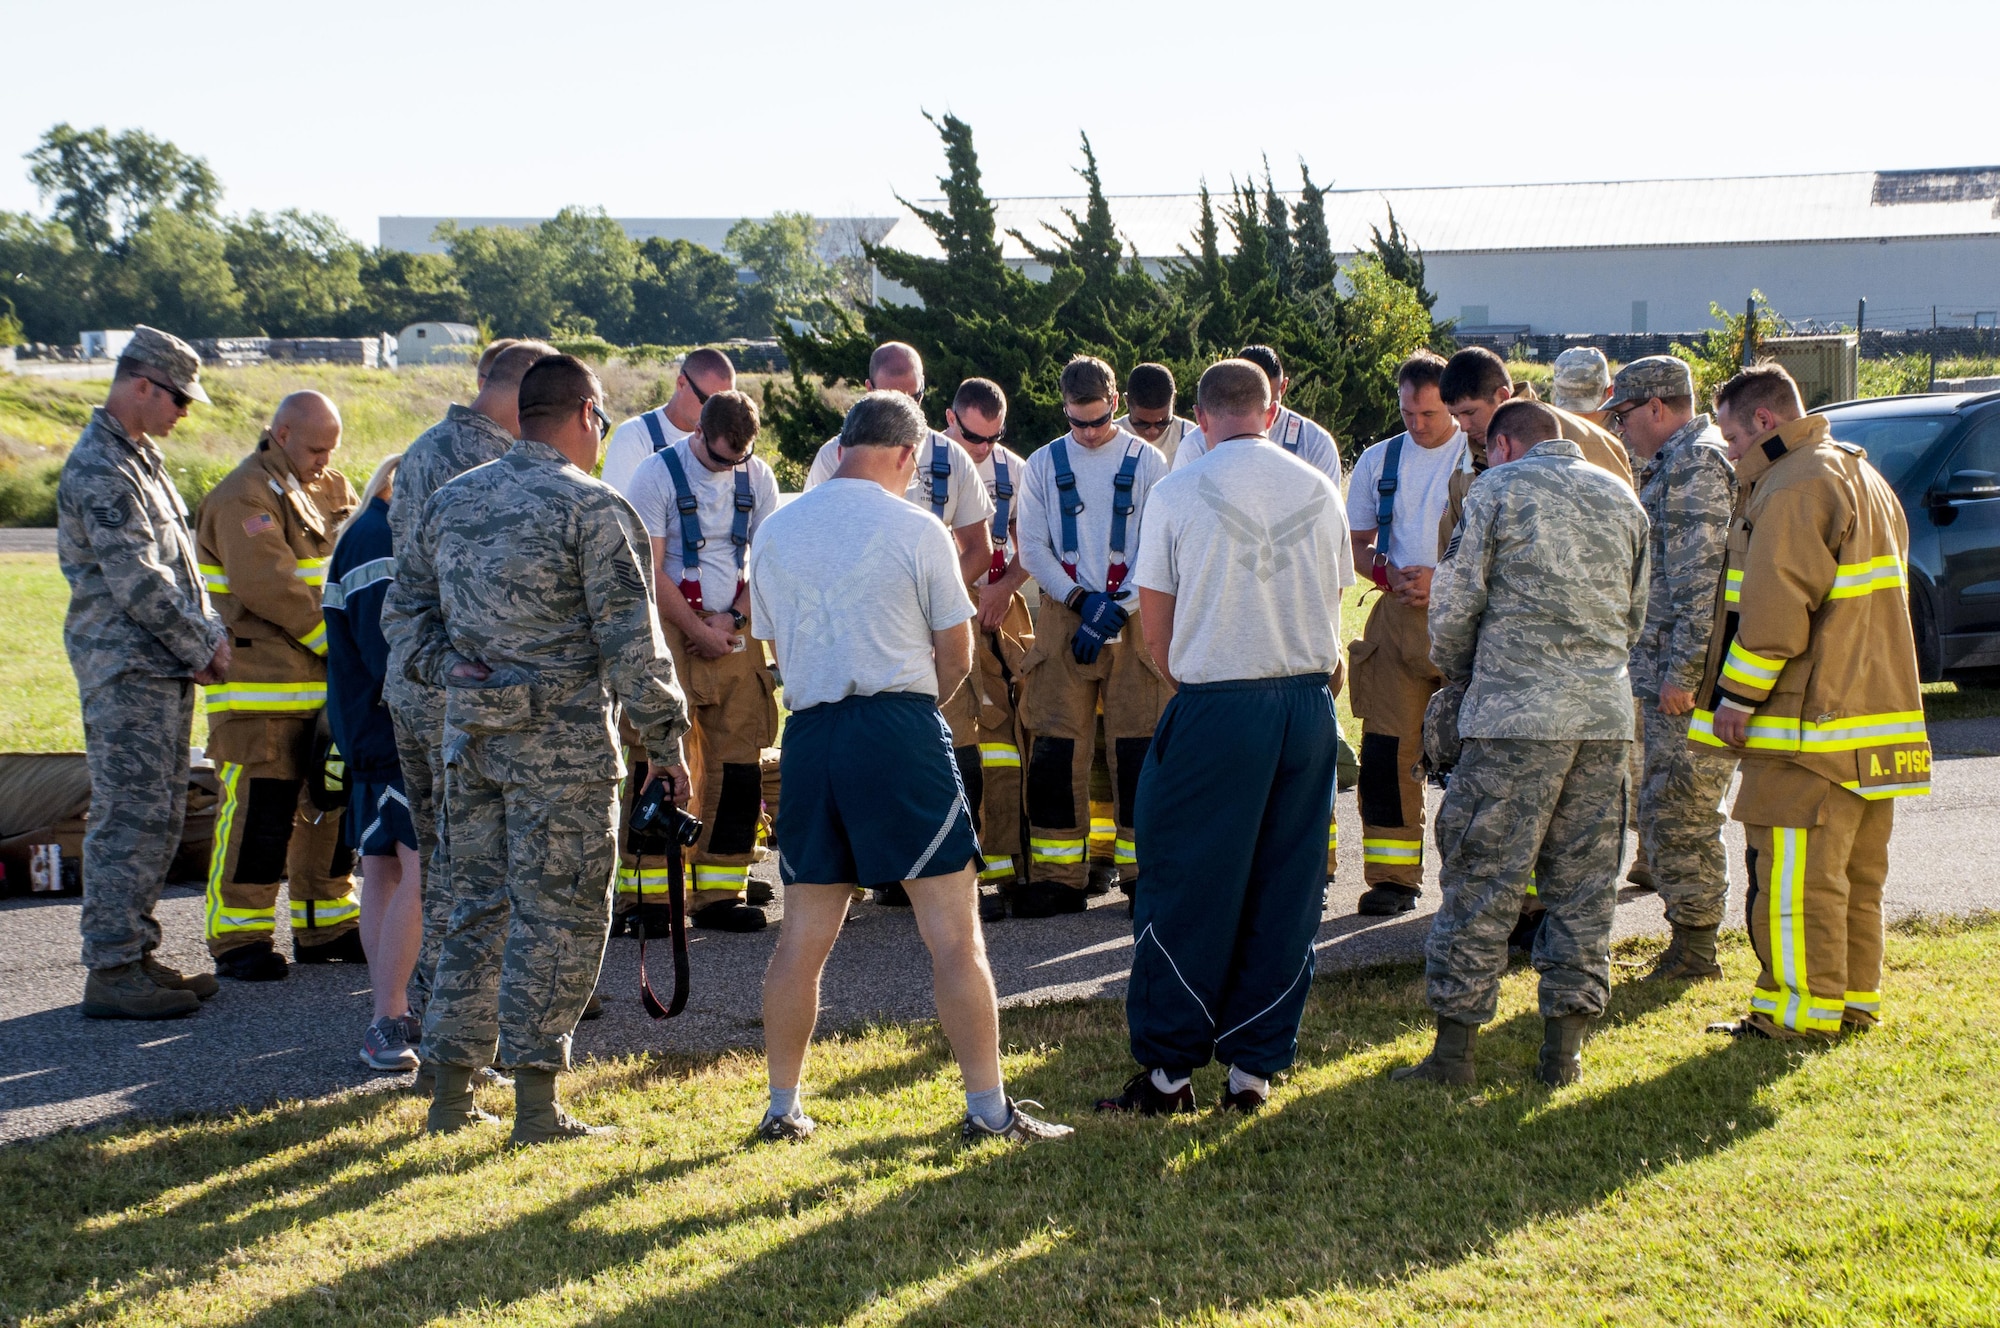 Okie firefighters from the 507th Civil Engineer Squadron and other Reservists from the 507th Air Refueling Wing pray before beginning their 7th annual fire climb Sept. 11, 2016, at Tinker Air Force Base, Okla. To remember the victims and heroes who perished 15 years ago, Reservists climb up and down the fire-training tower to complete the 18 laps within 56 minutes, the amount of time it took the South Tower of the World Trade Center to collapse. (U.S. Air Force photo/Master Sgt. Grady Epperly)
